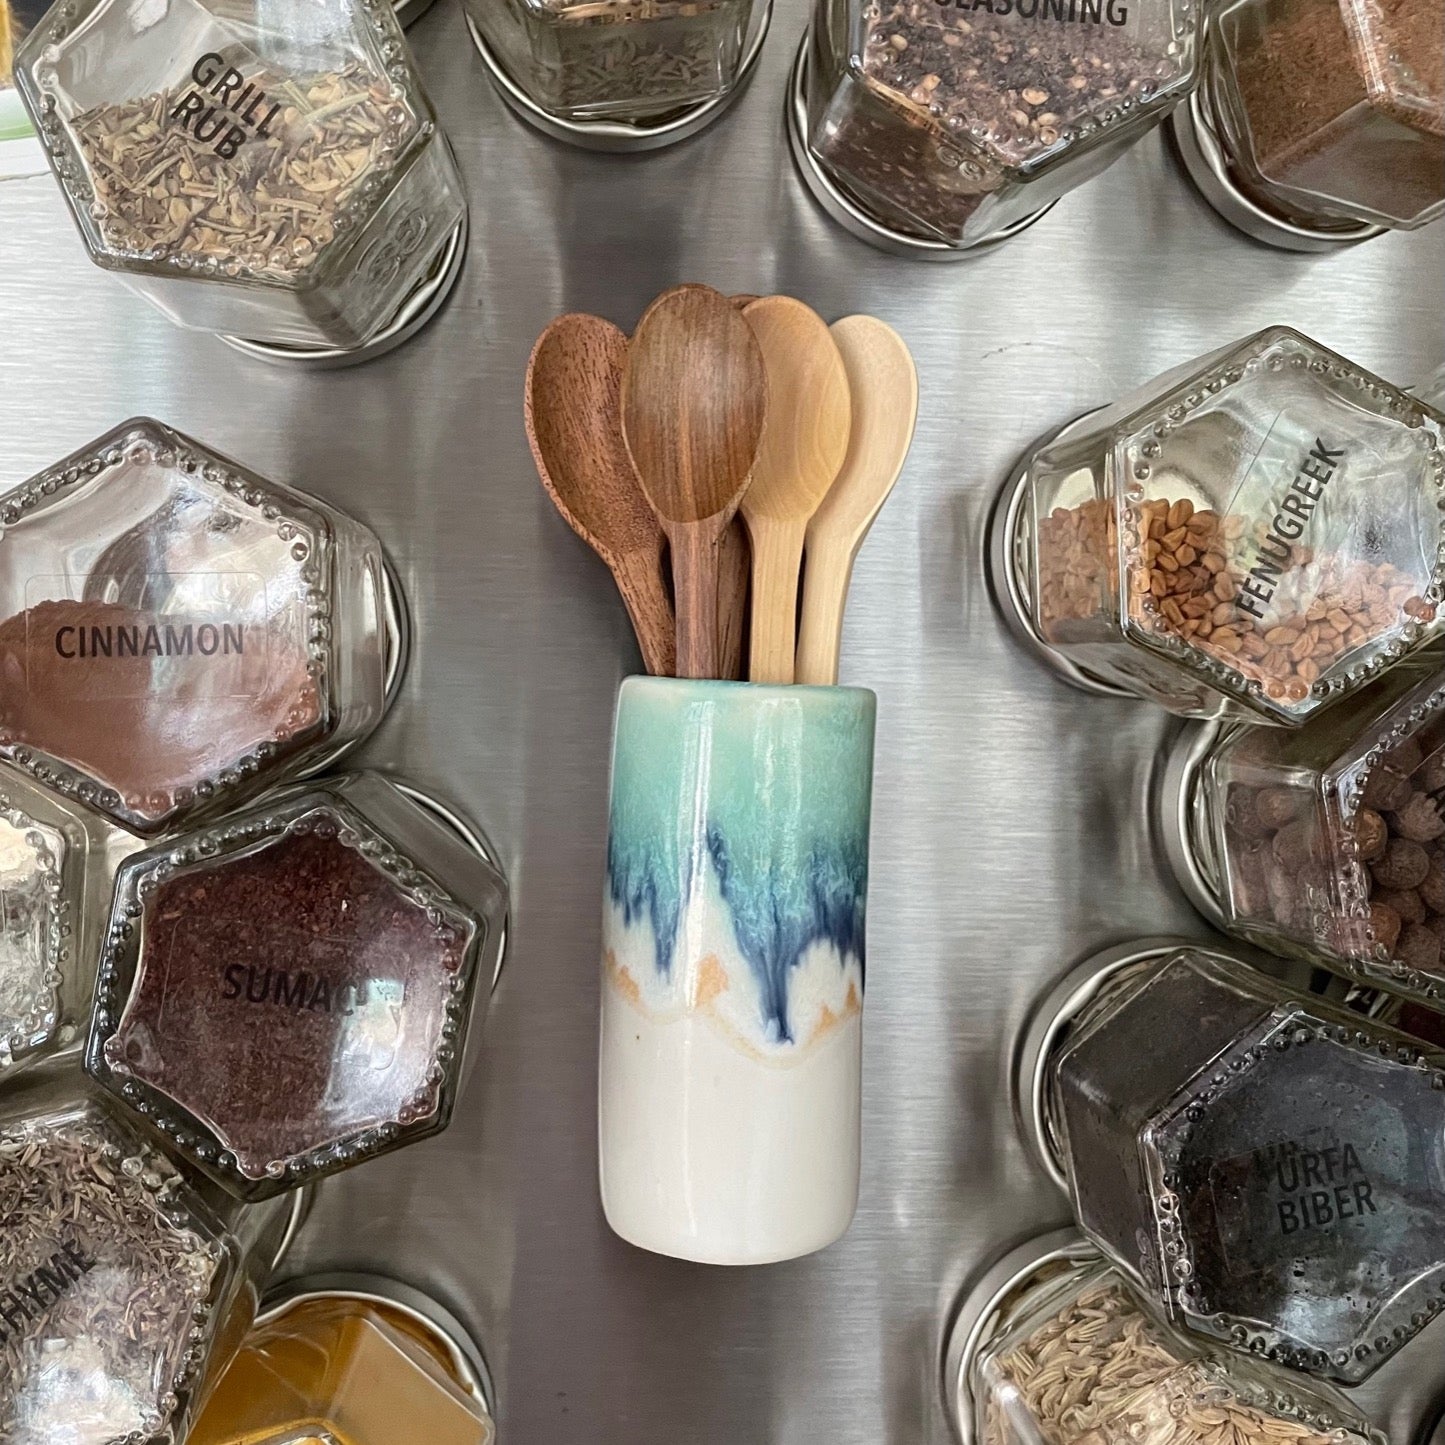 Hand-Carved Mini Spice Spoons | Gneiss Spice Accessories Single Spoon